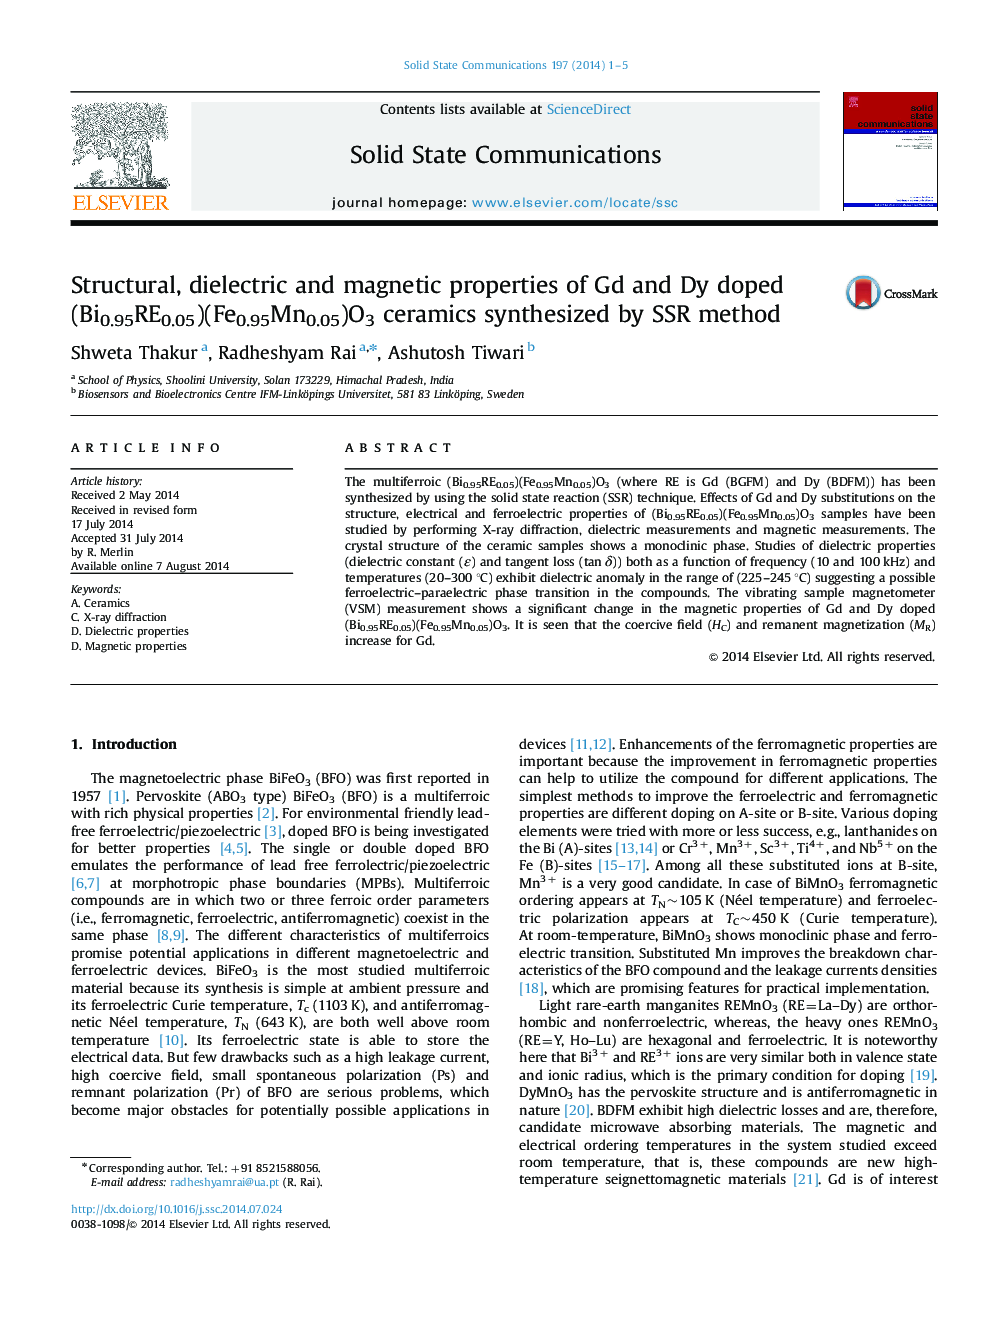 Structural, dielectric and magnetic properties of Gd and Dy doped (Bi0.95RE0.05)(Fe0.95Mn0.05)O3 ceramics synthesized by SSR method